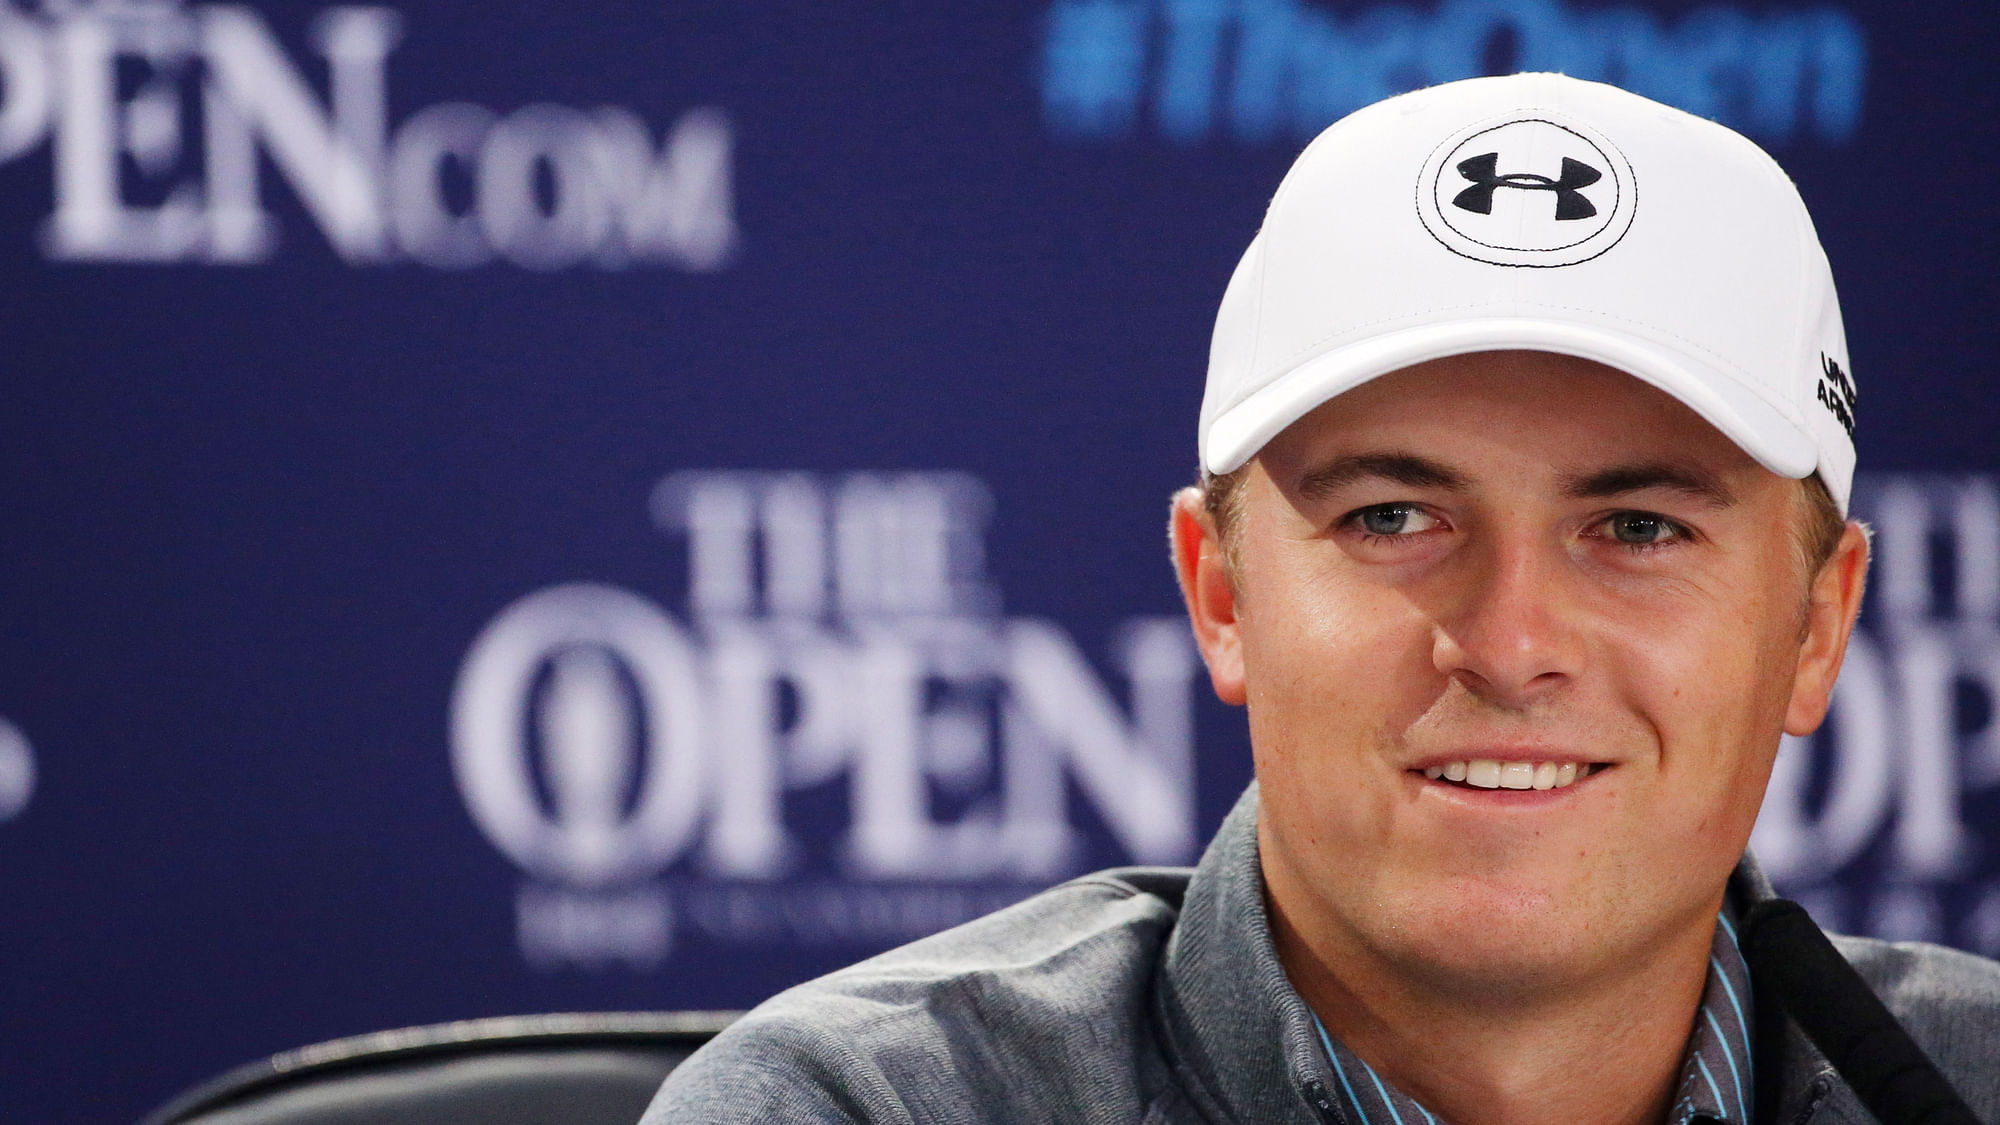 United States’ Jordan Spieth smiles during a news conference ahead of a practice round at the British Open. (Photo: AP)